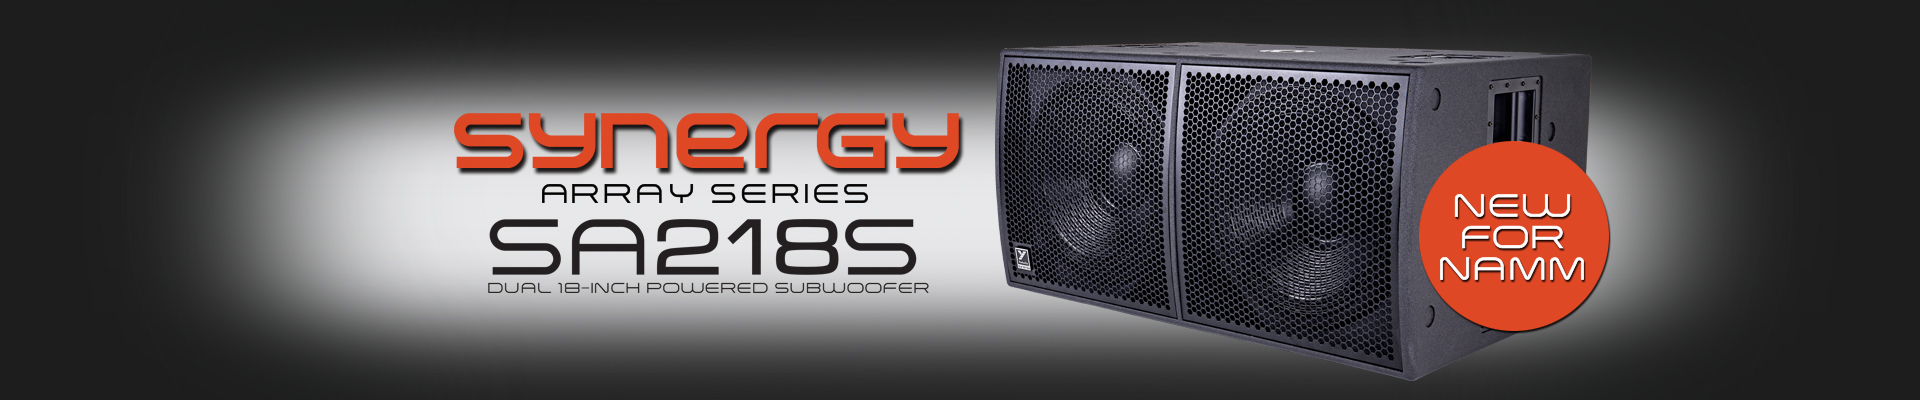 /loudspeakers/synergy/product/sa218s/ banner